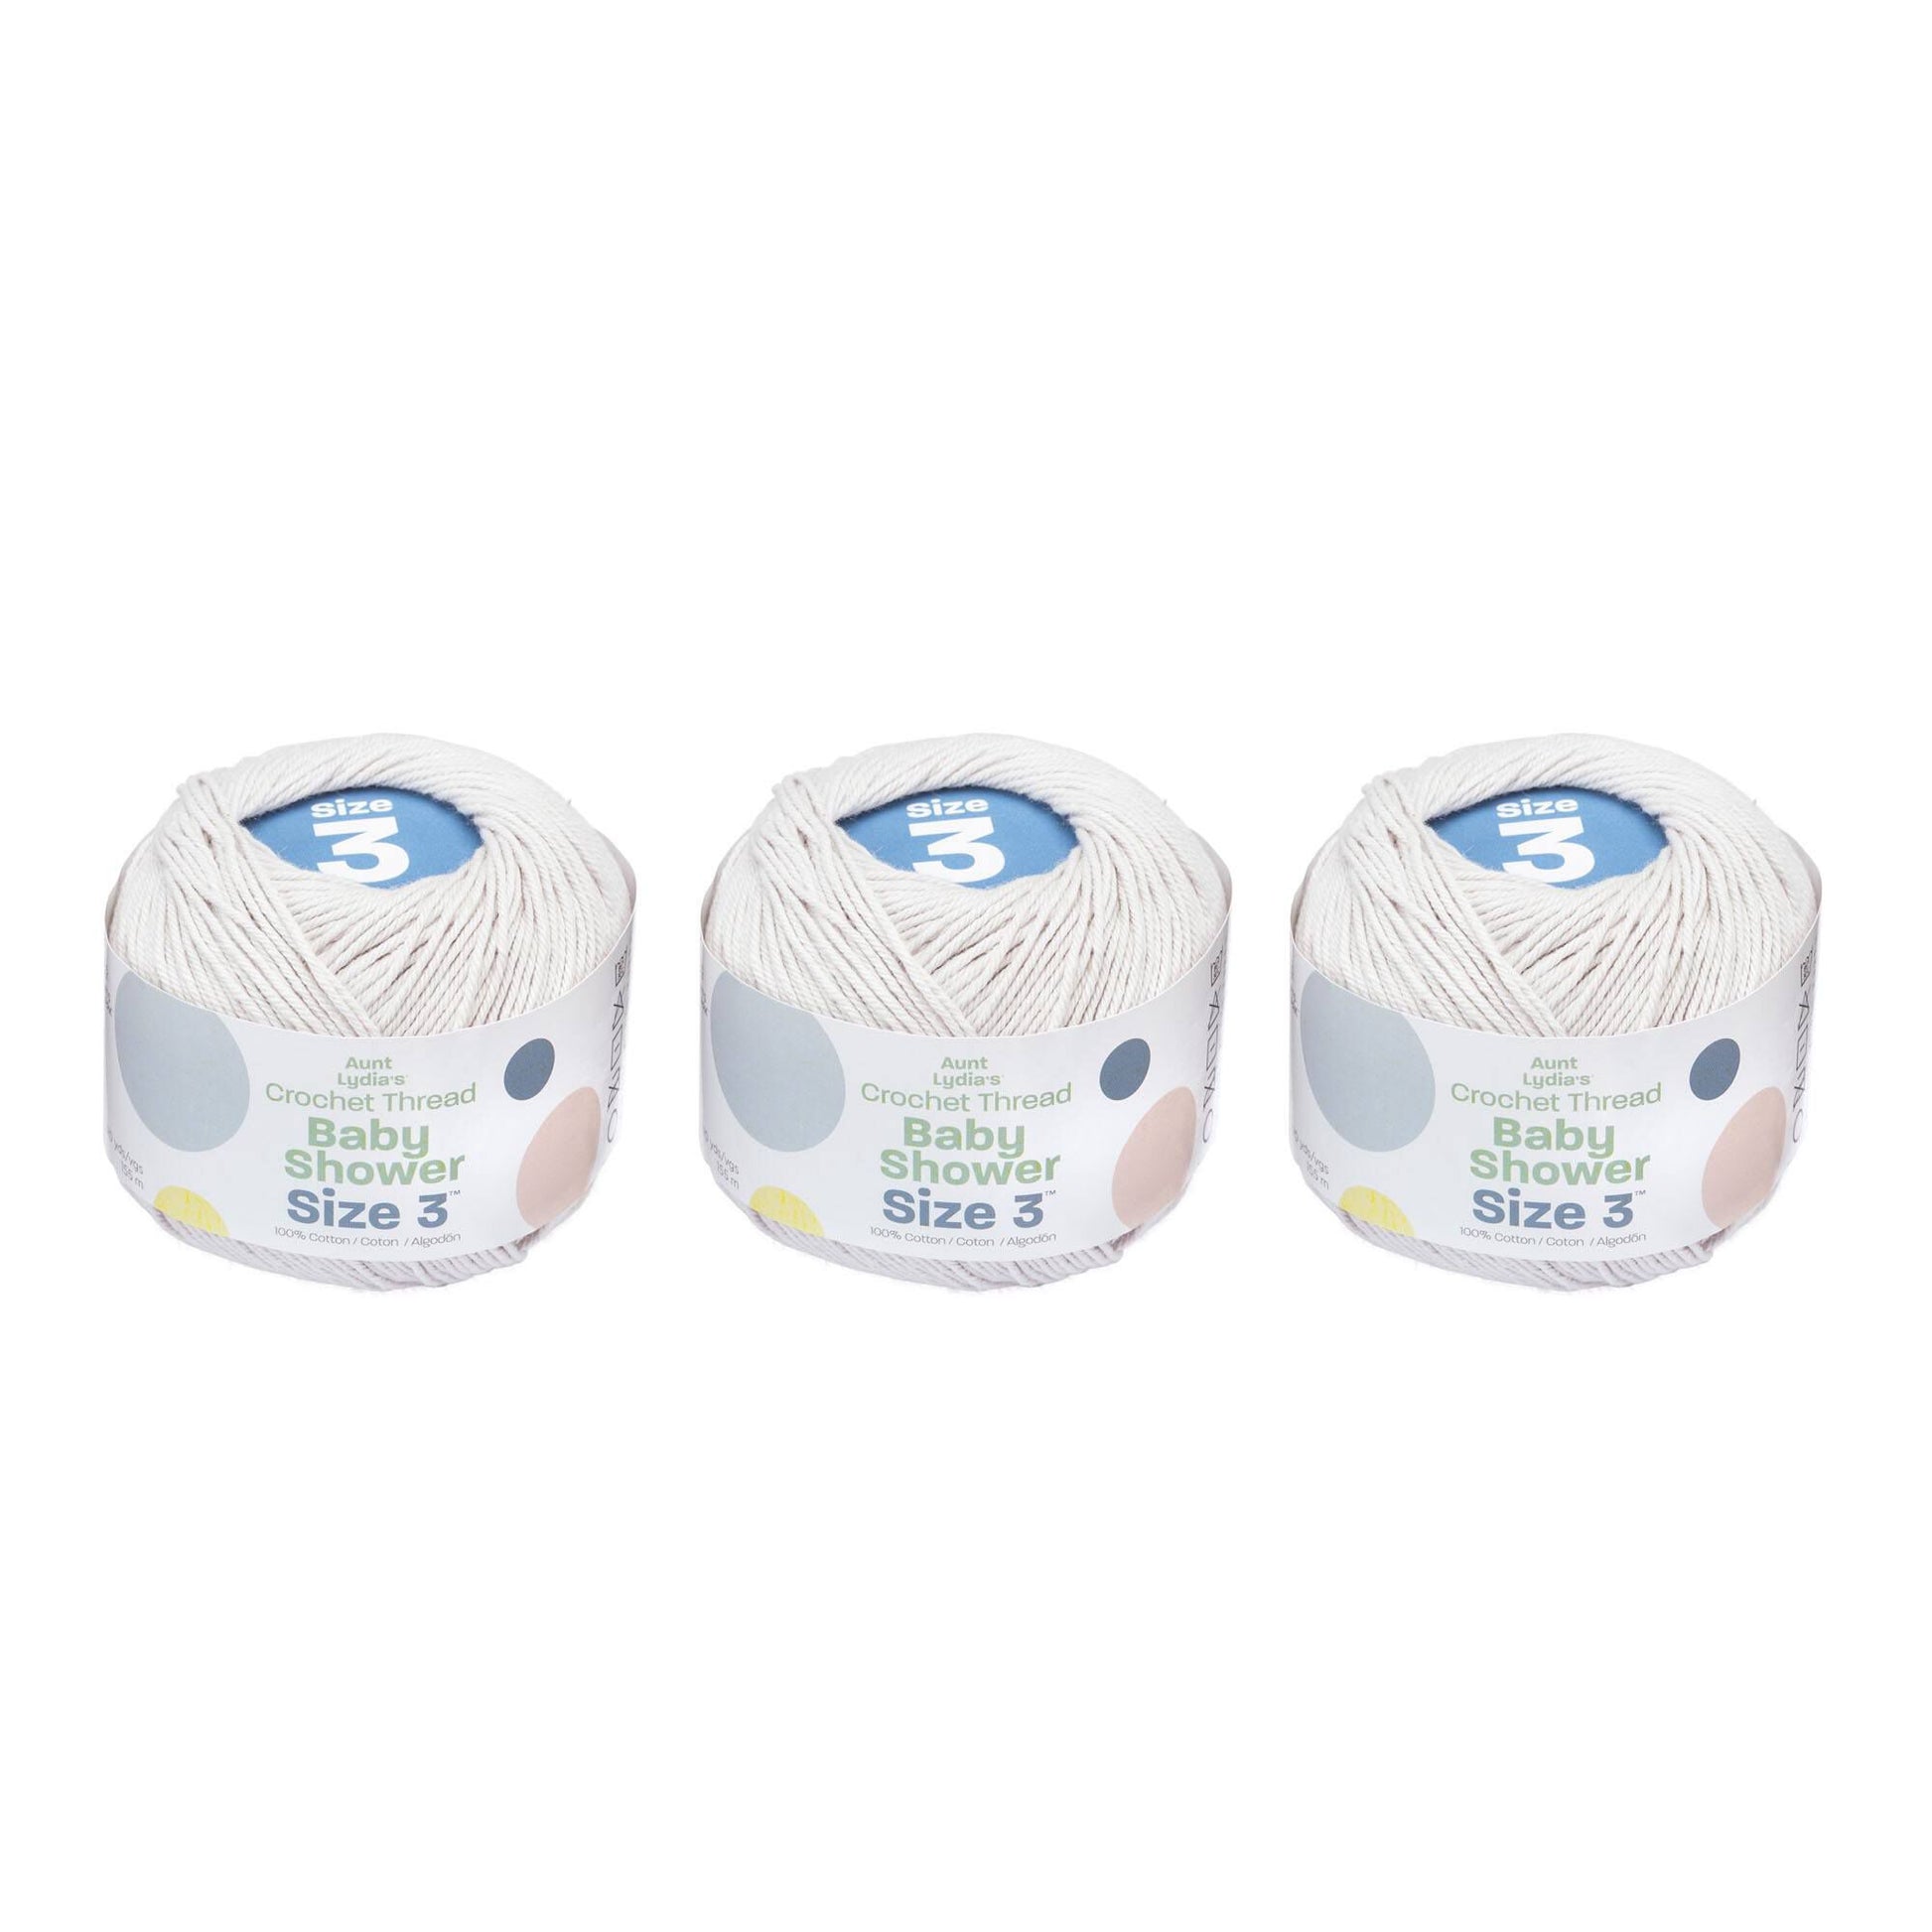 Aunt Lydia's Baby Shower Crochet Thread Size 3 (3 Pack) Silver